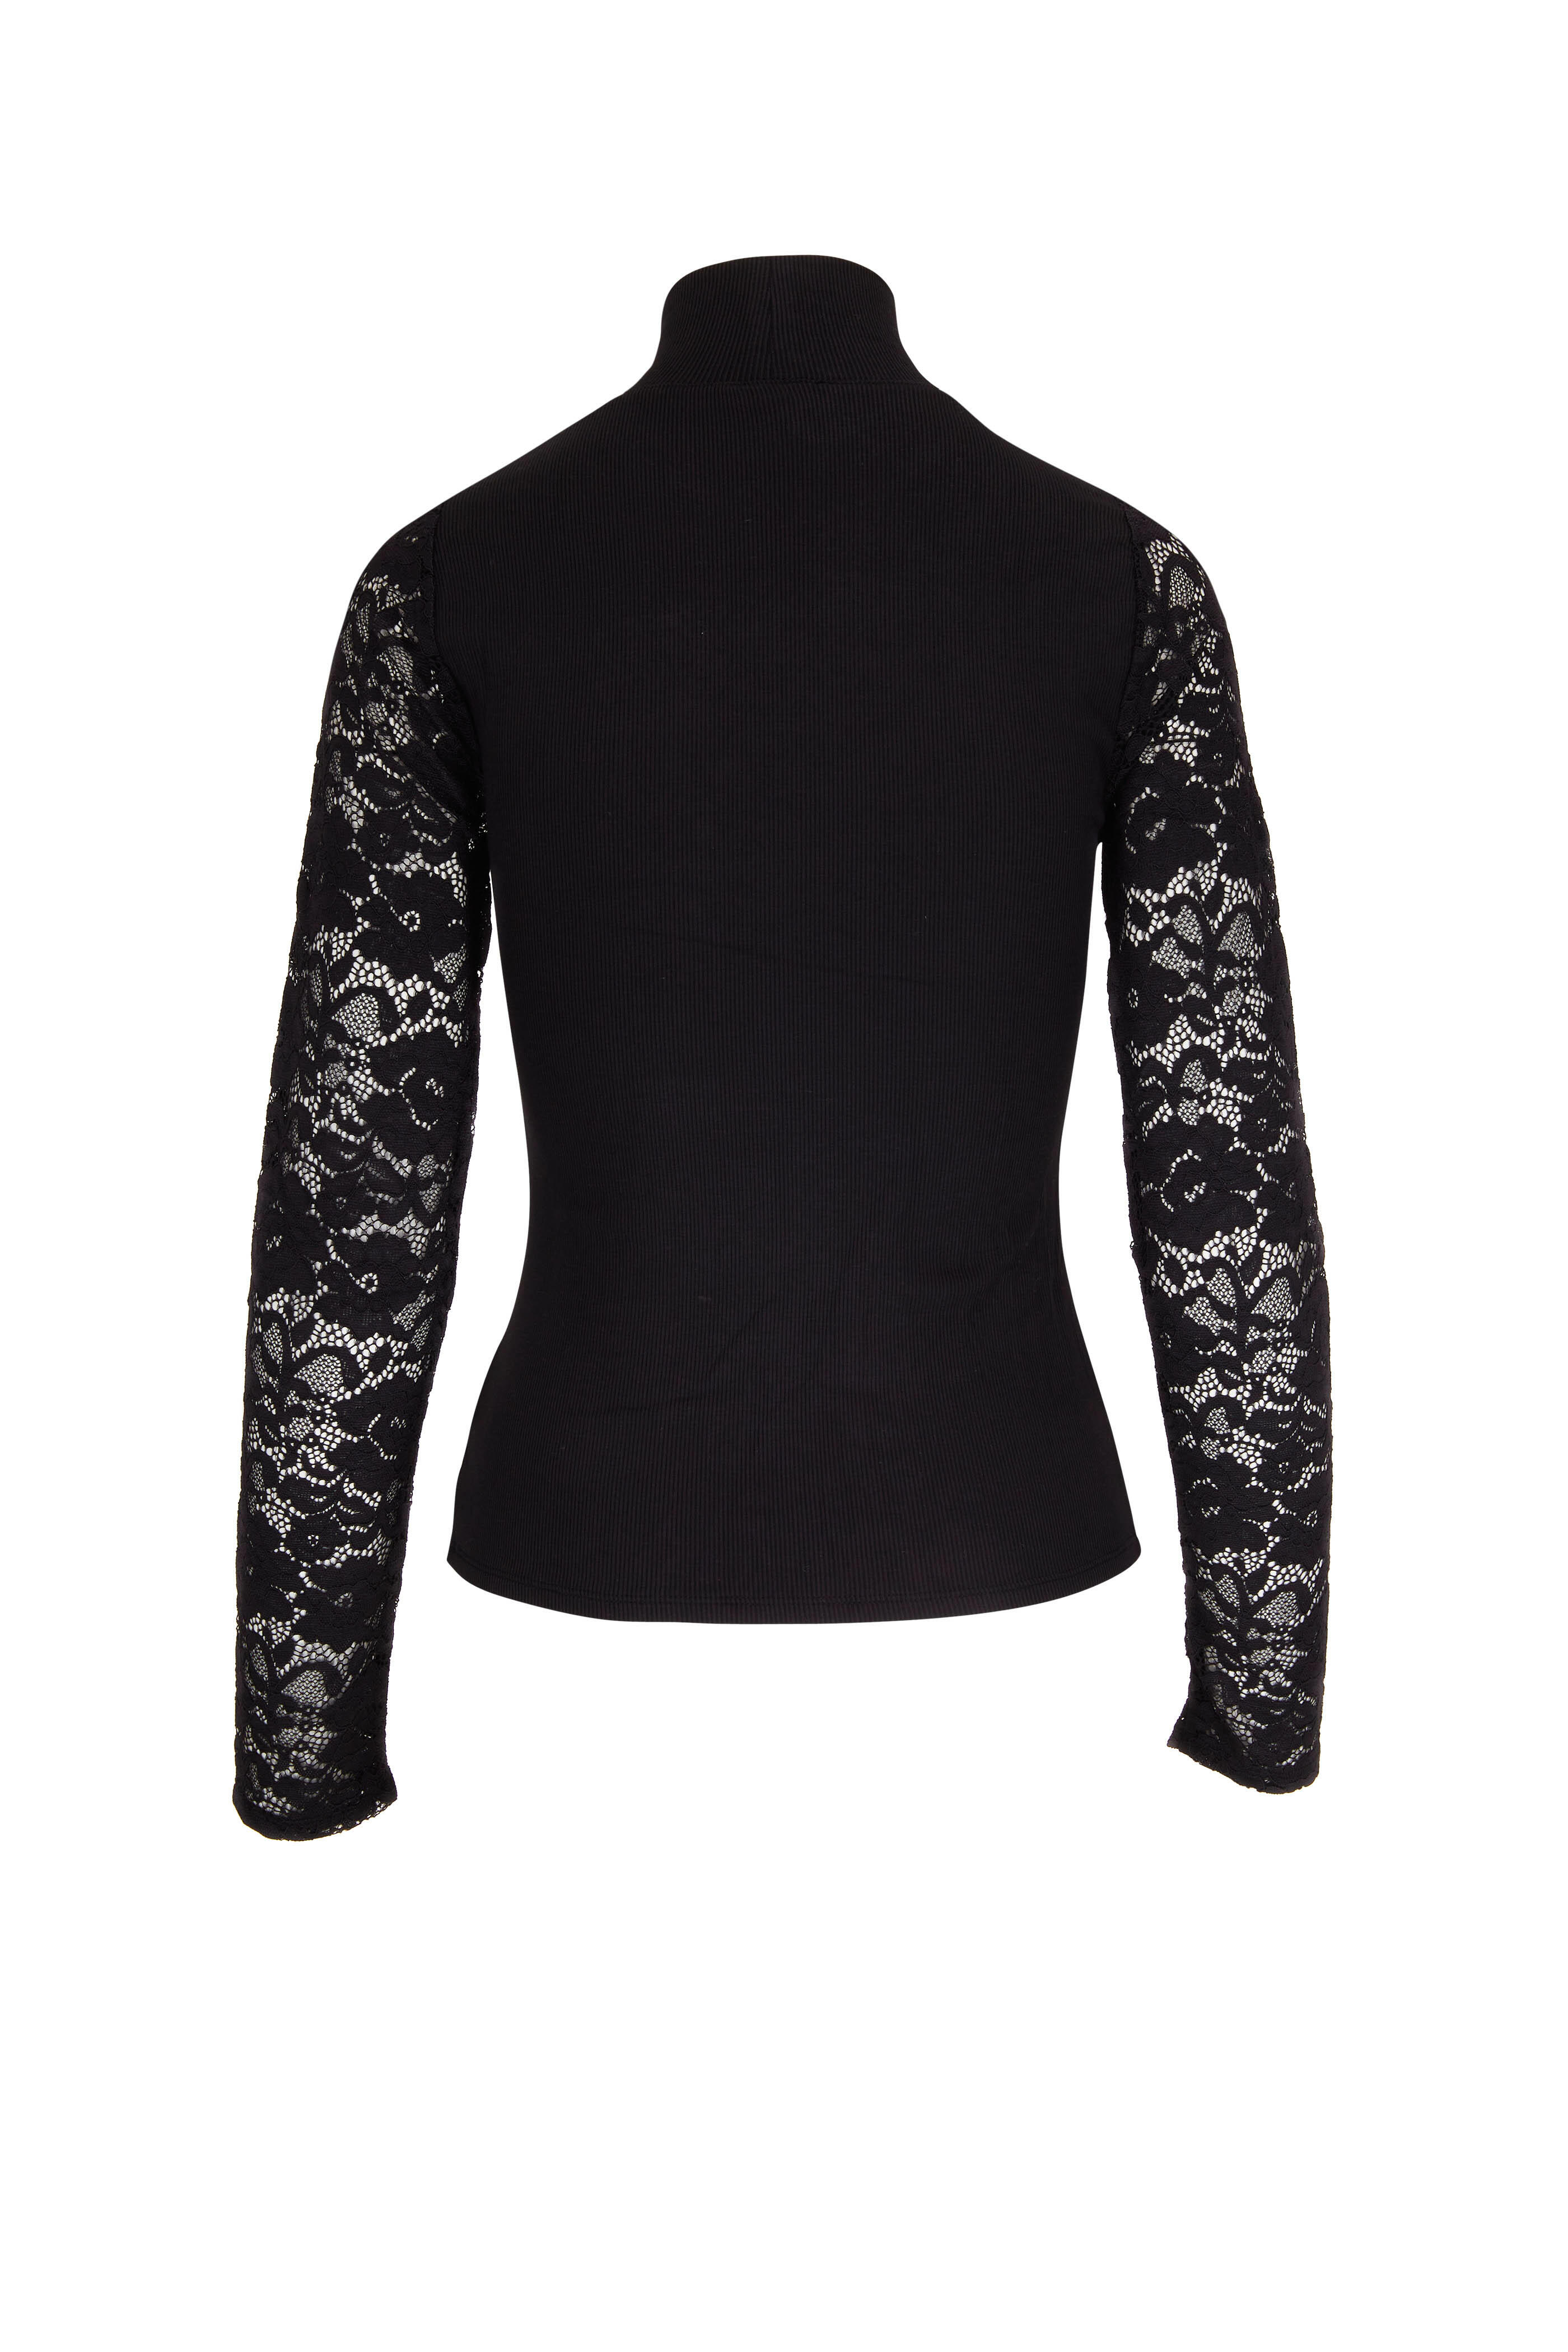 Paige - Golda Black Lace Top | Mitchell Stores